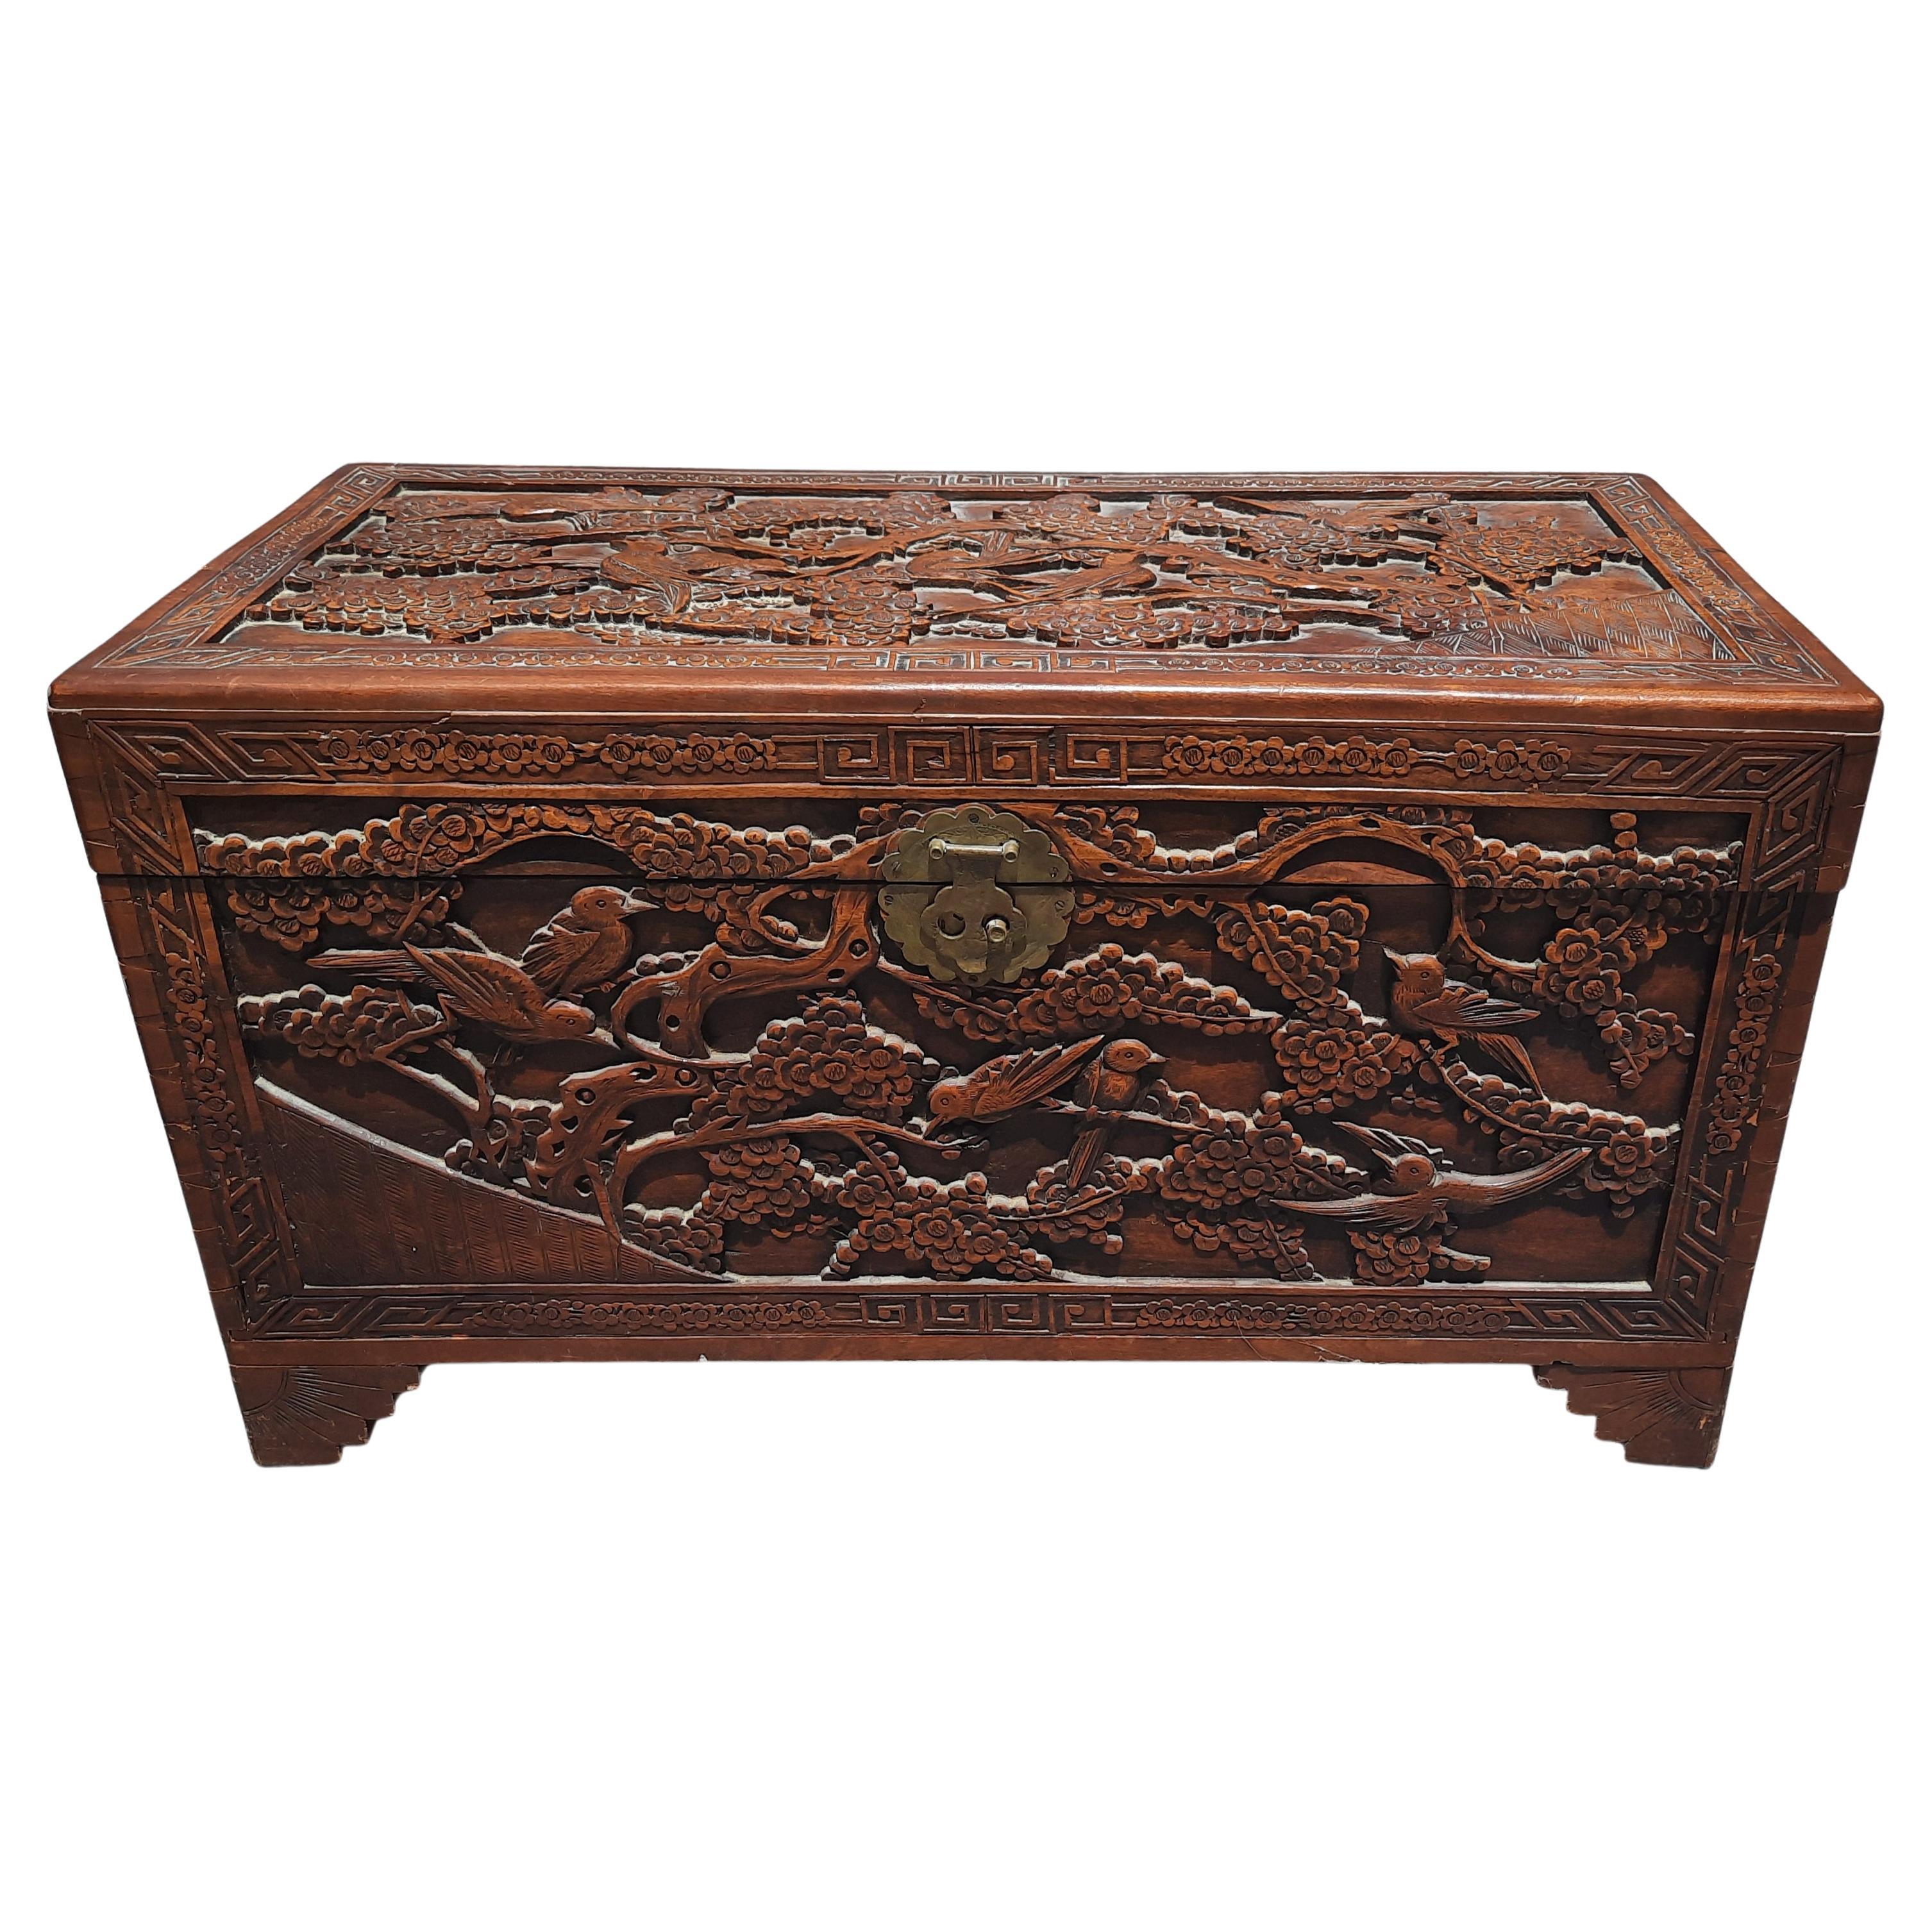 19th Century Heavily Hand Carved Asian Blanket Chest Trunk